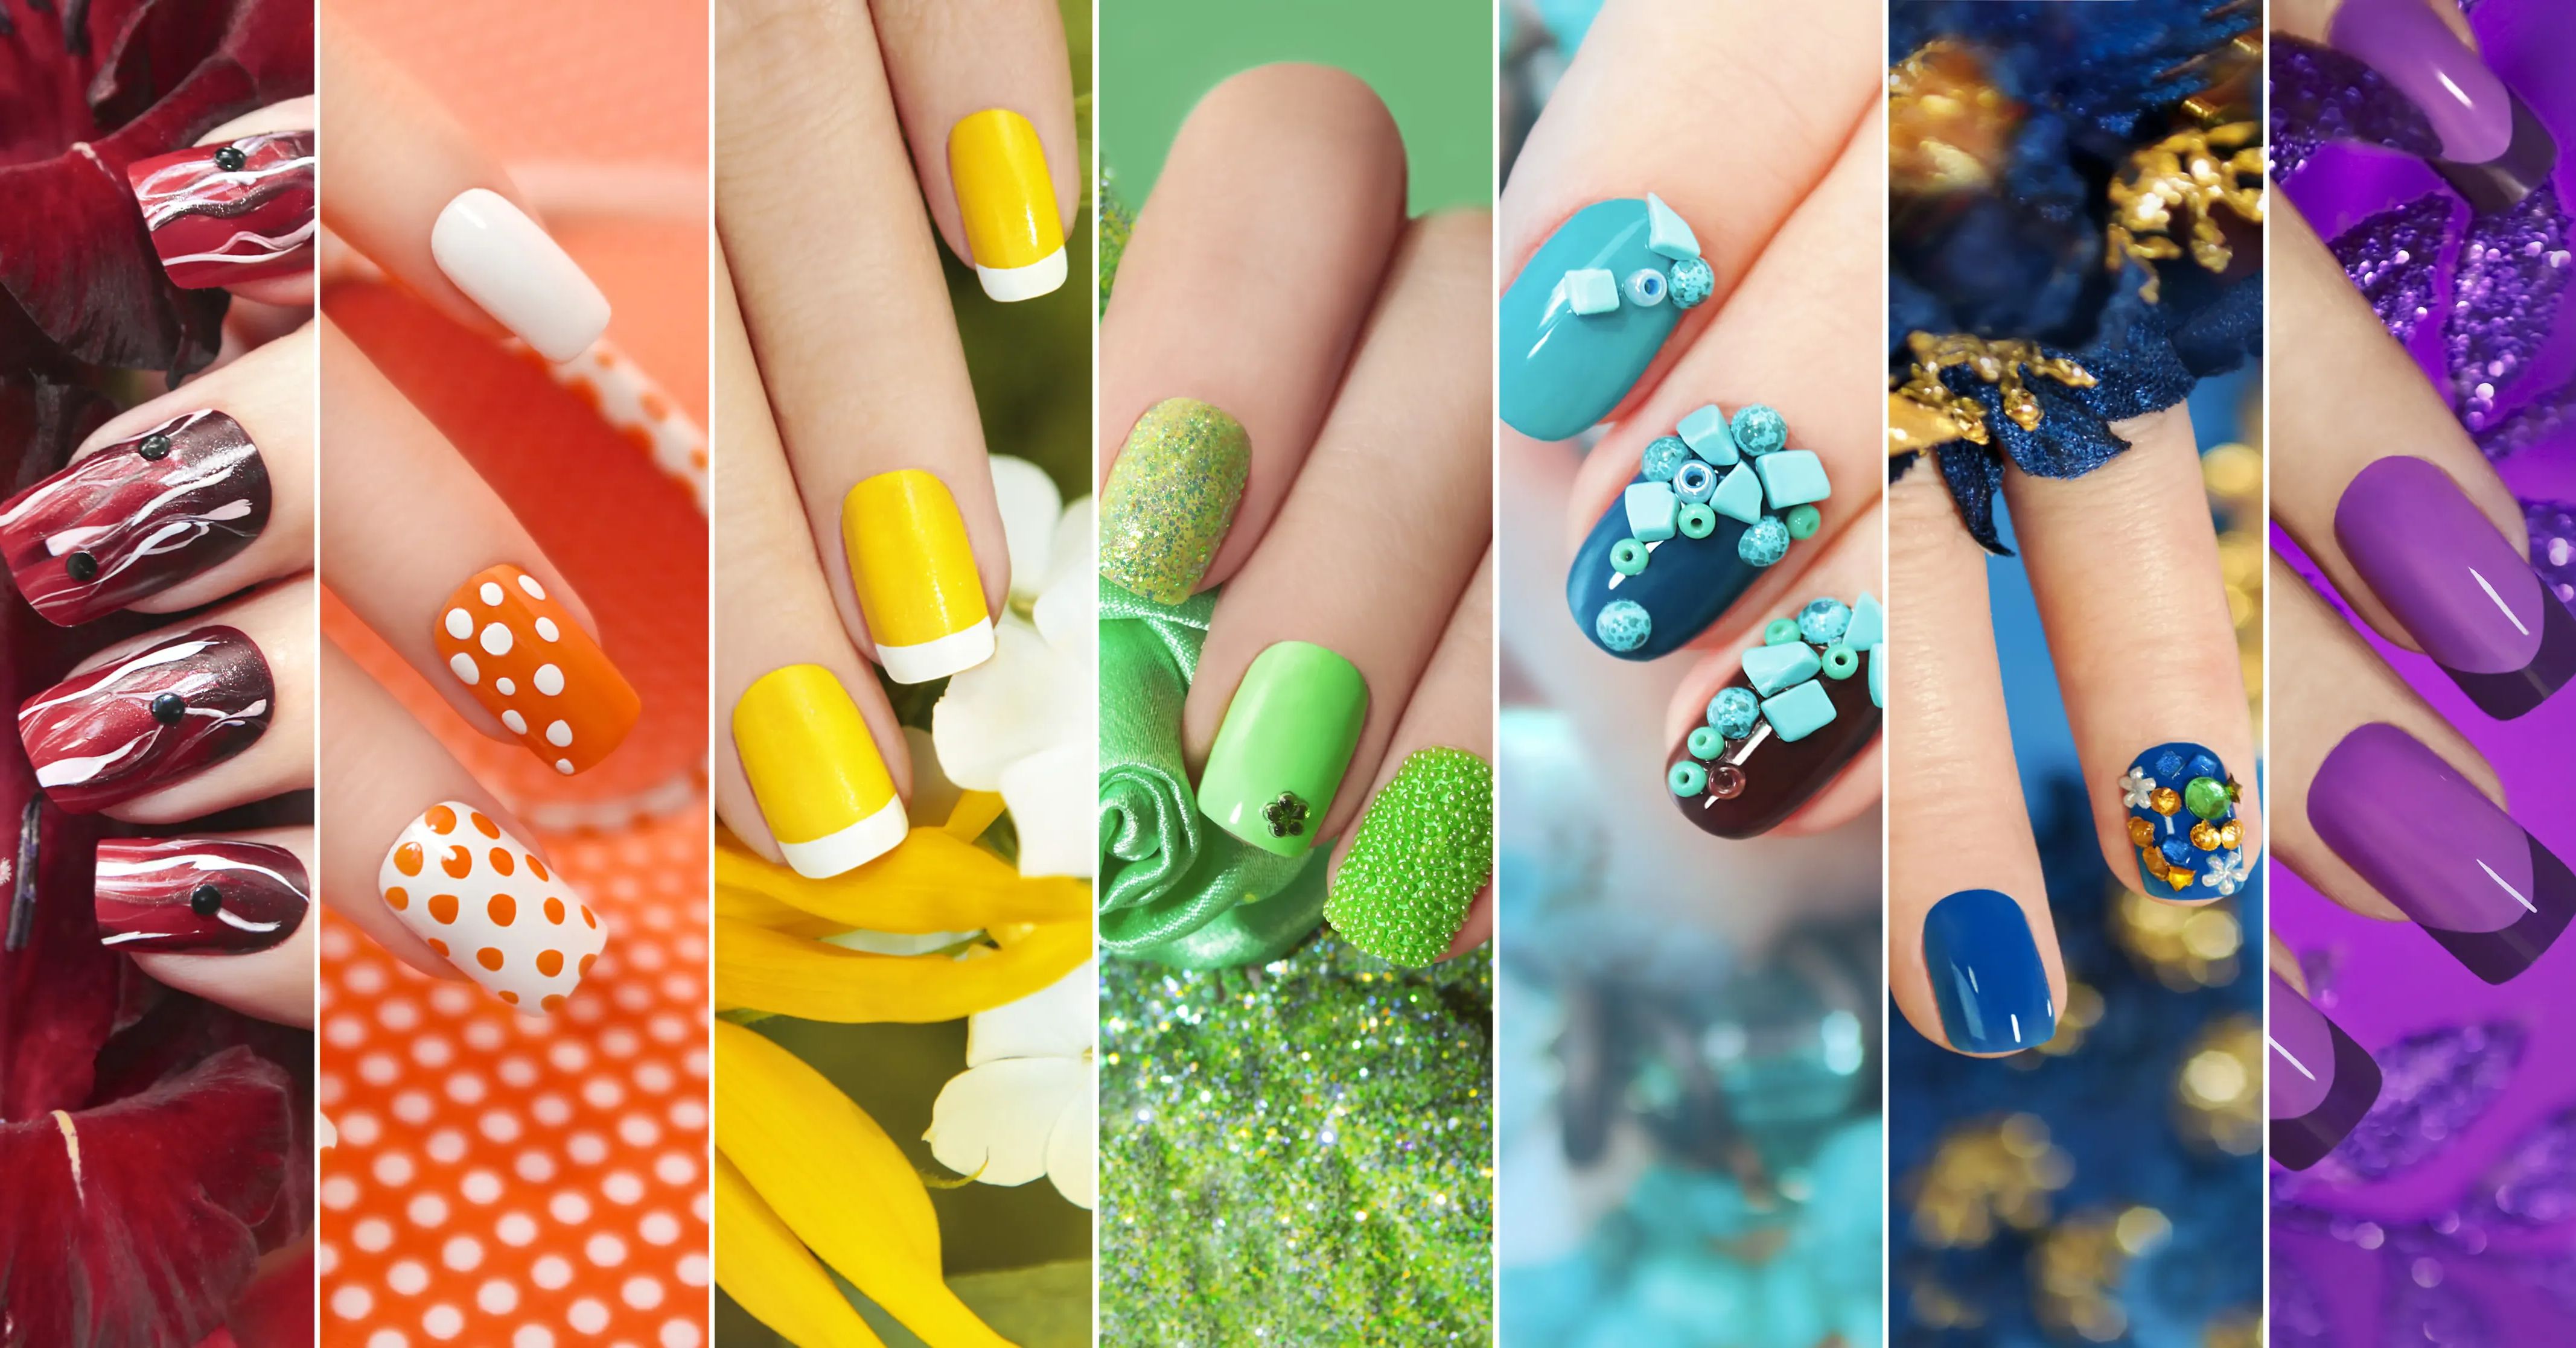 5. Download images of nail designs - wide 8